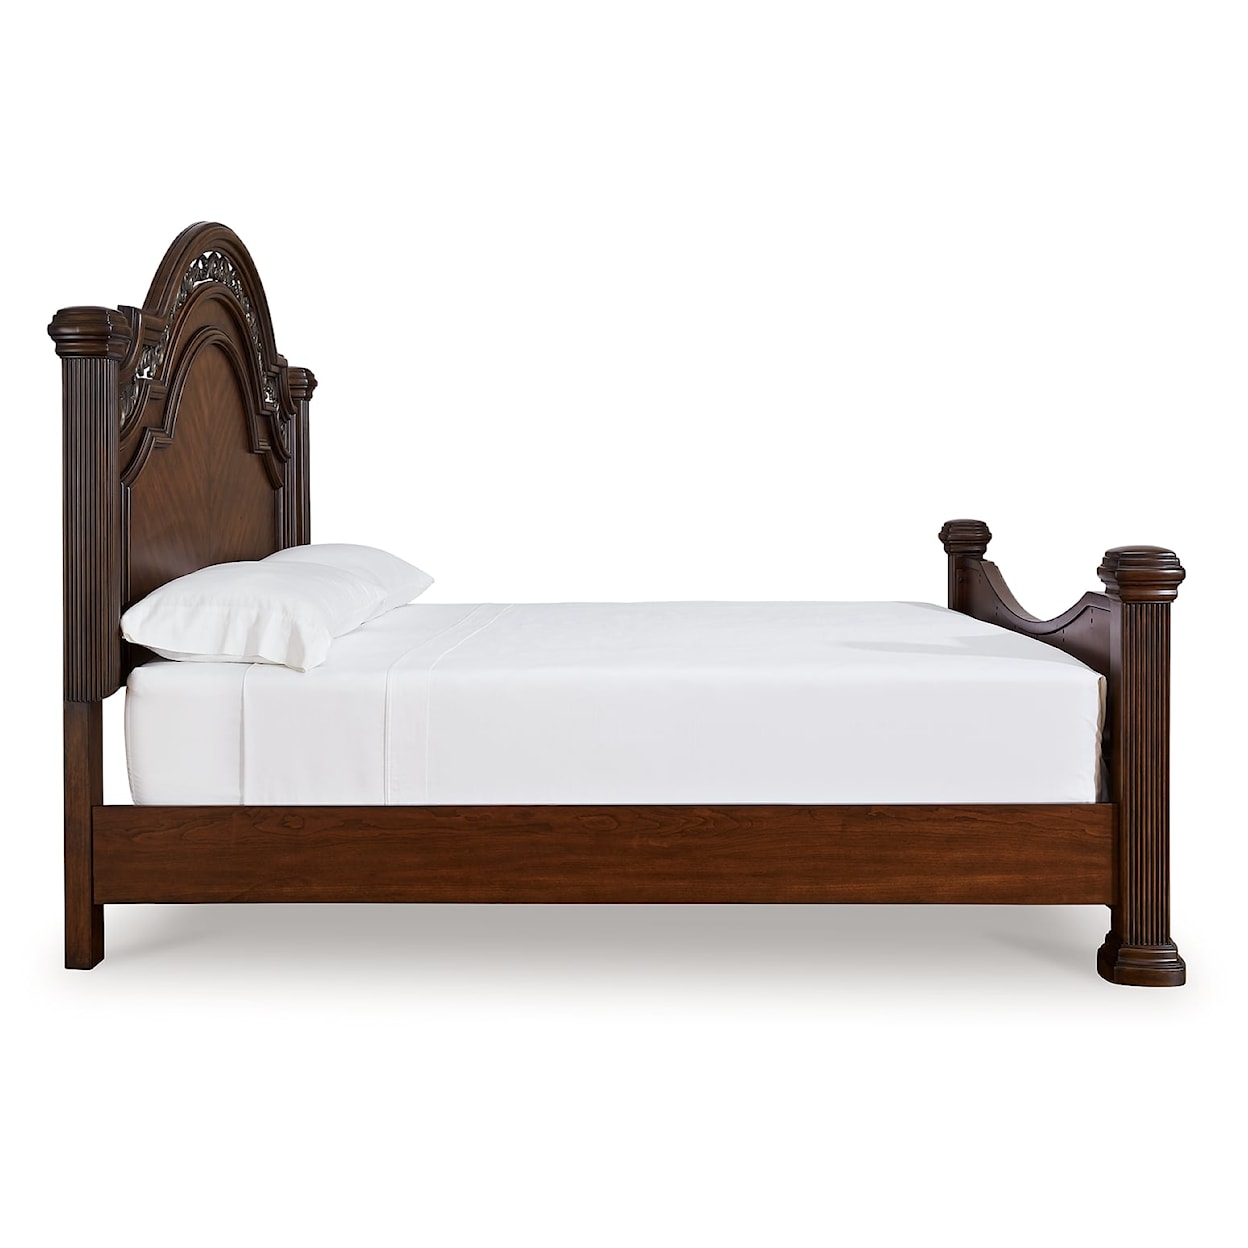 Signature Design by Ashley Lavinton Queen Poster Bed